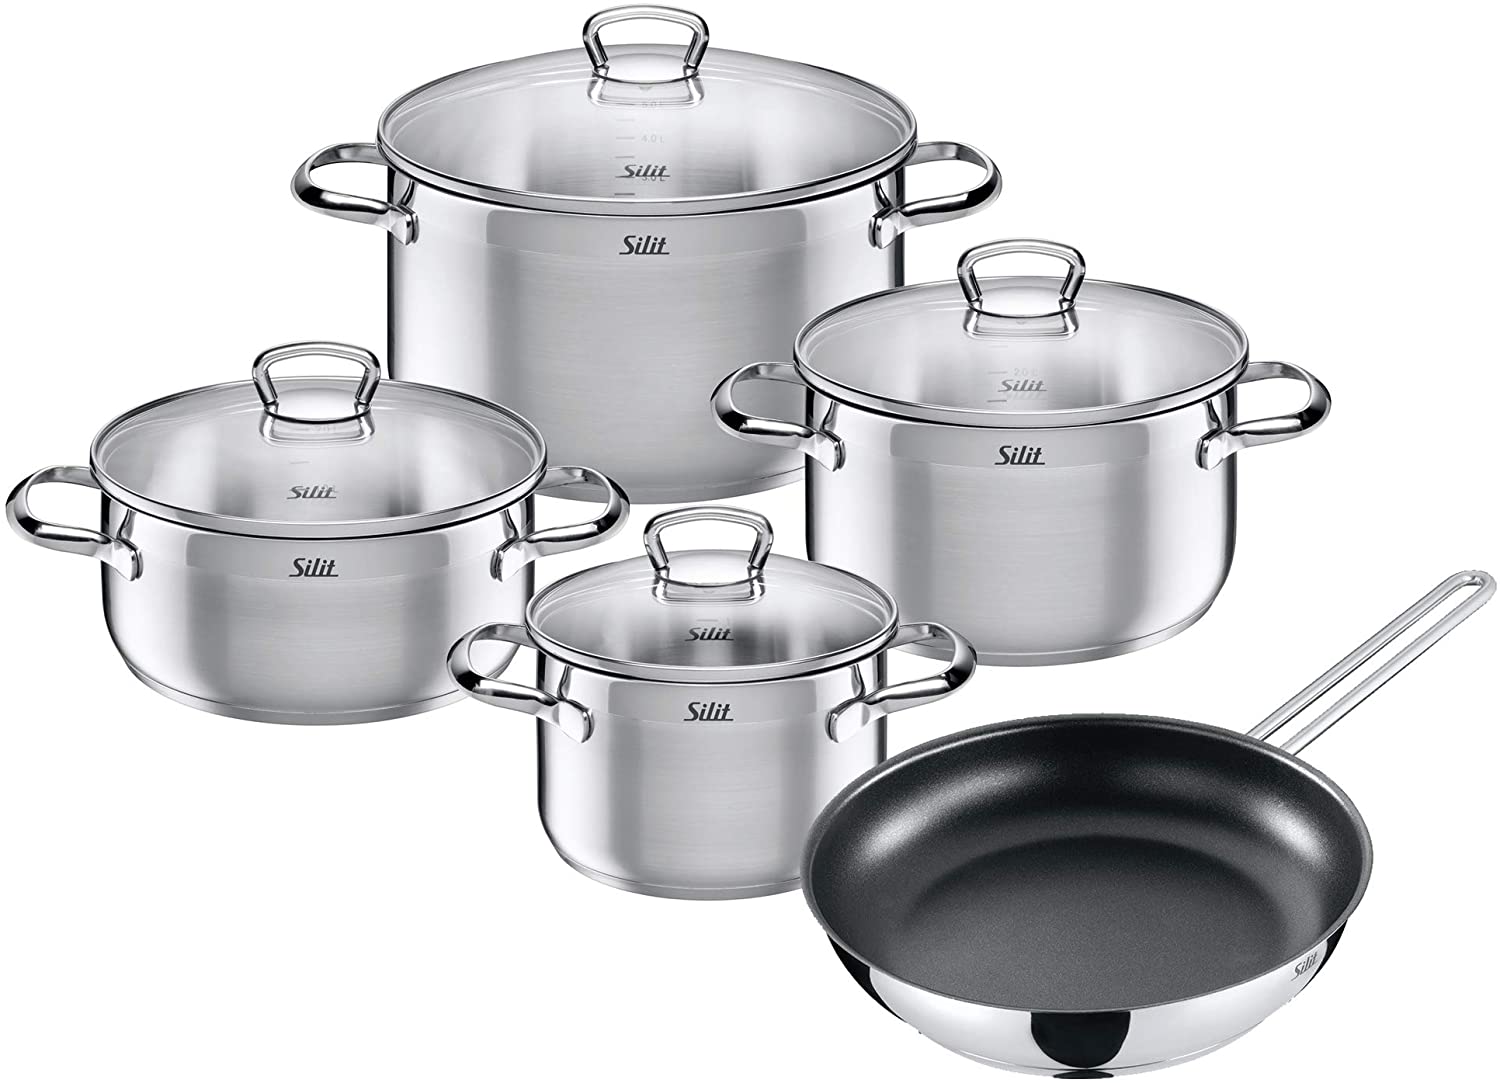 Silit Tuscany Saucepan Set Induction 5-Piece Cooking Pot Set with Glass Lid, Stainless Steel, Partially Matte, Induction Pots Set, Uncoated